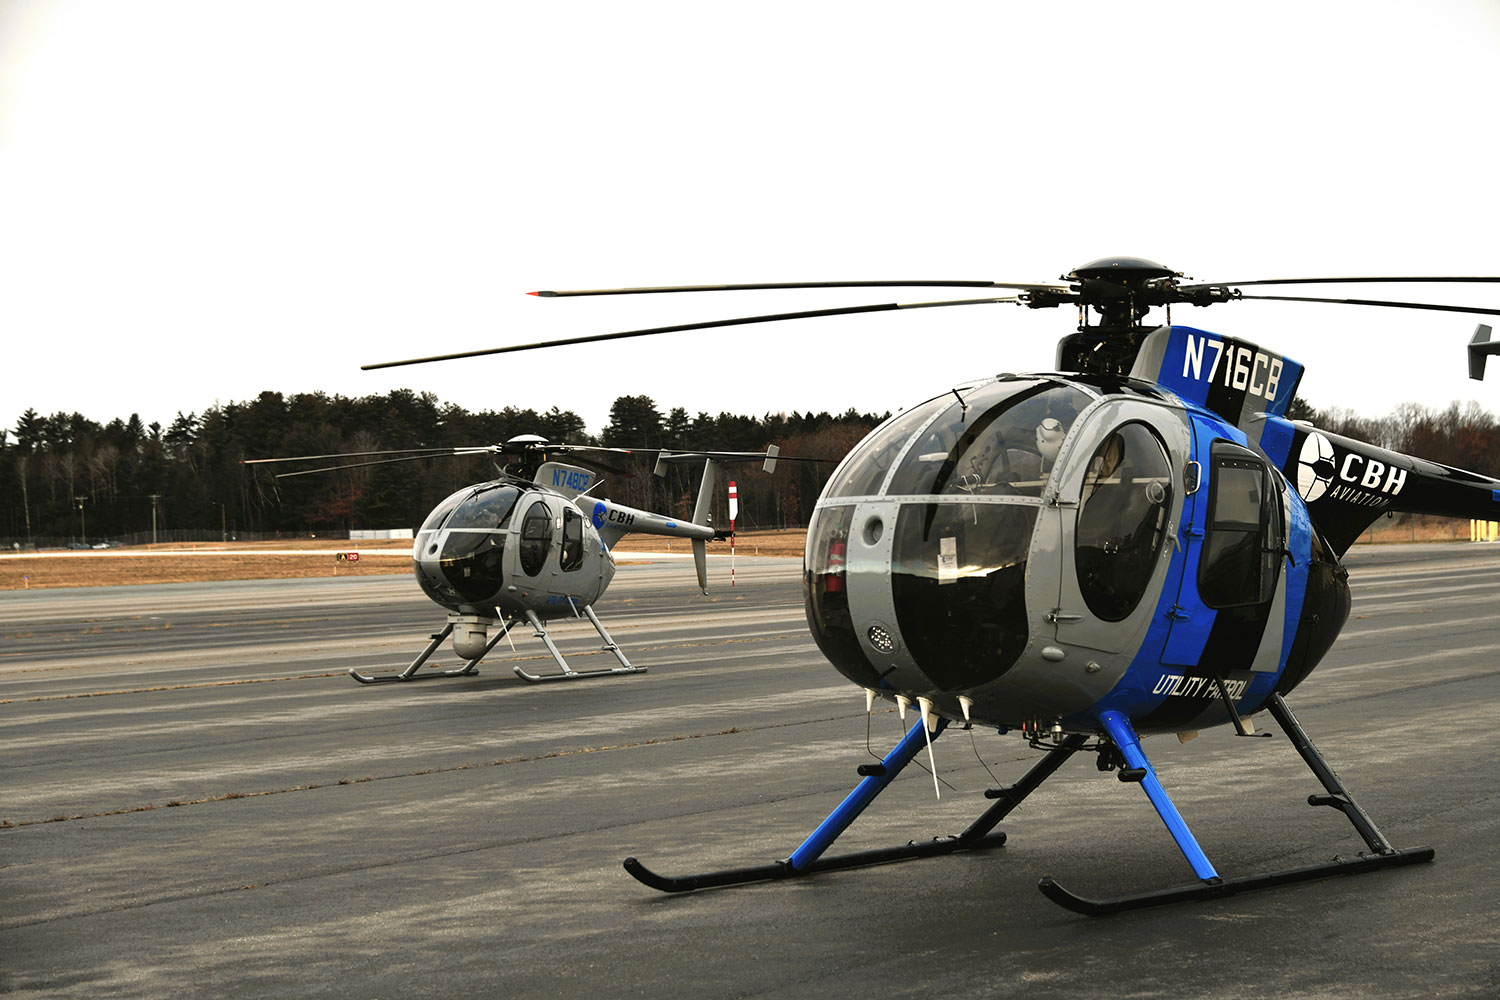 CBH Aviation helicopters on the tarmac